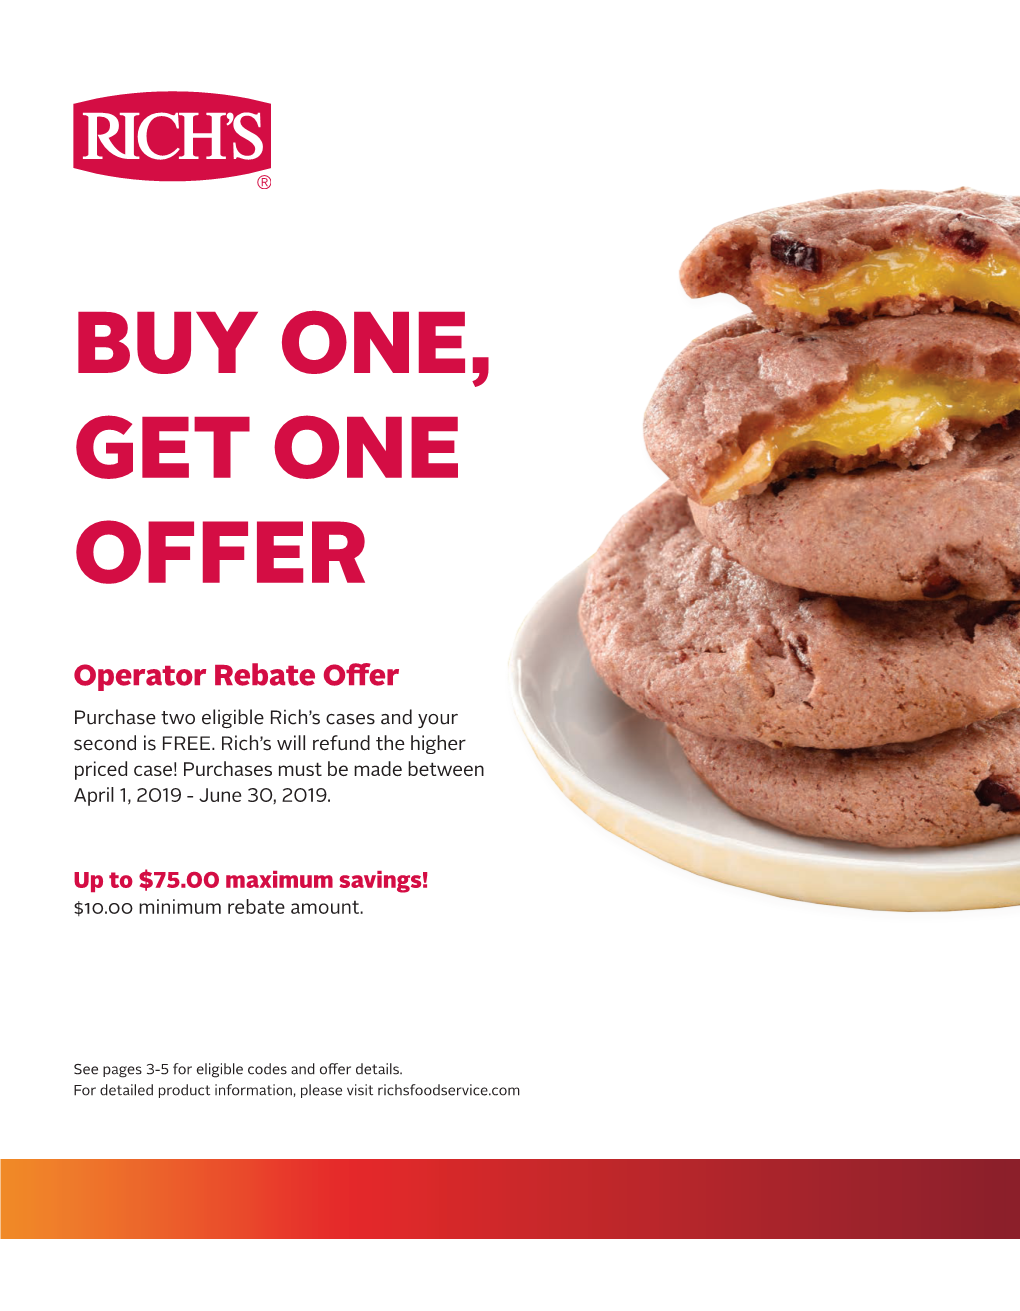 Buy One, Get One Offer